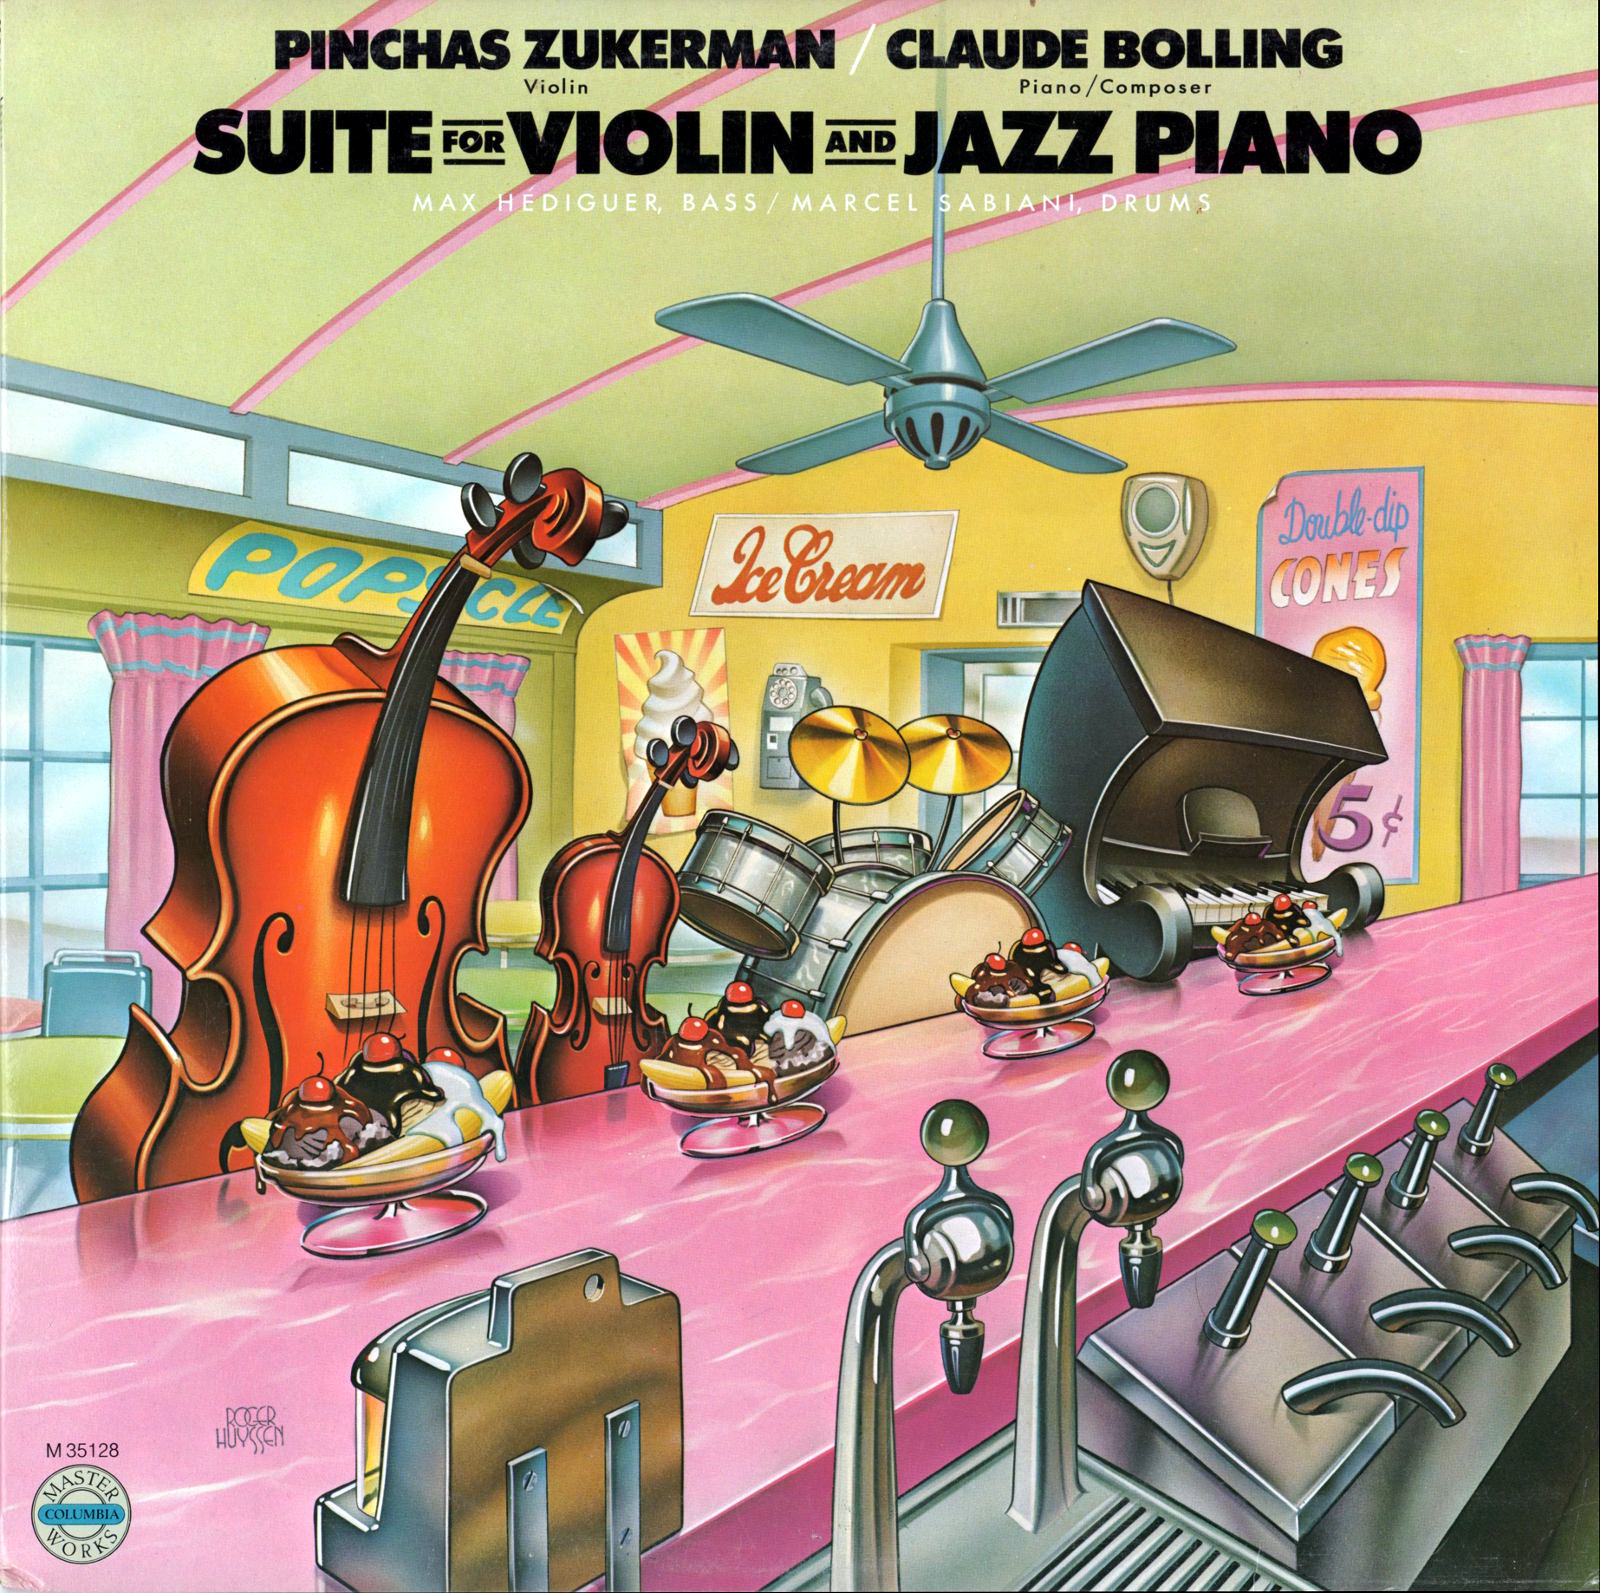 roger-huyssen_suite-for-violin-and-jazz-piano_cbs-1978_m35128